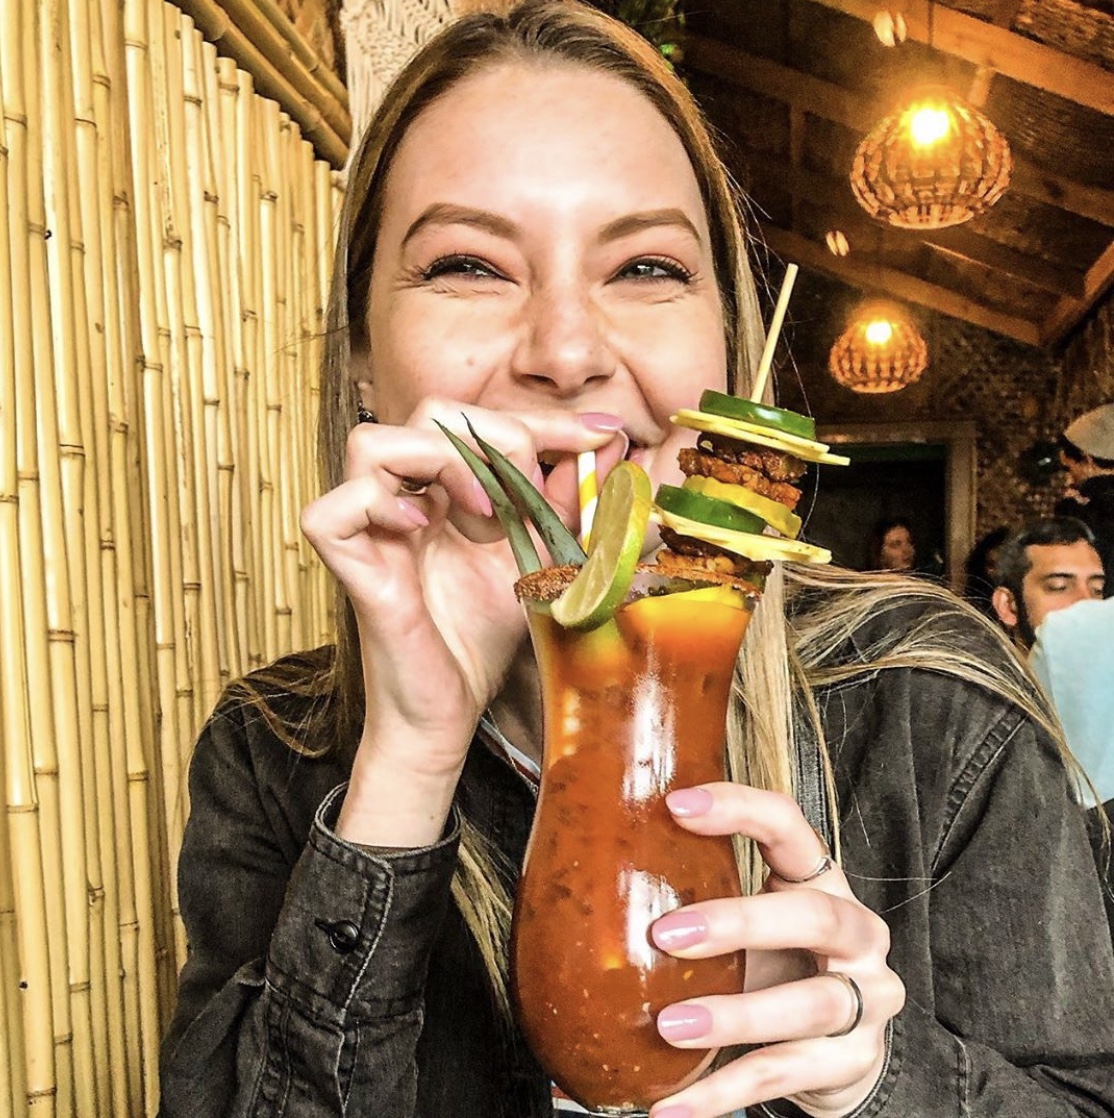 We're all smiles cause our friends over at @demitrisbloodymary created a brand new vegan mix 🦈 Come brunch with us Fri-Sun from 11am - 3pm!! #brunchgoals #nobonesbrunchclub #vegan